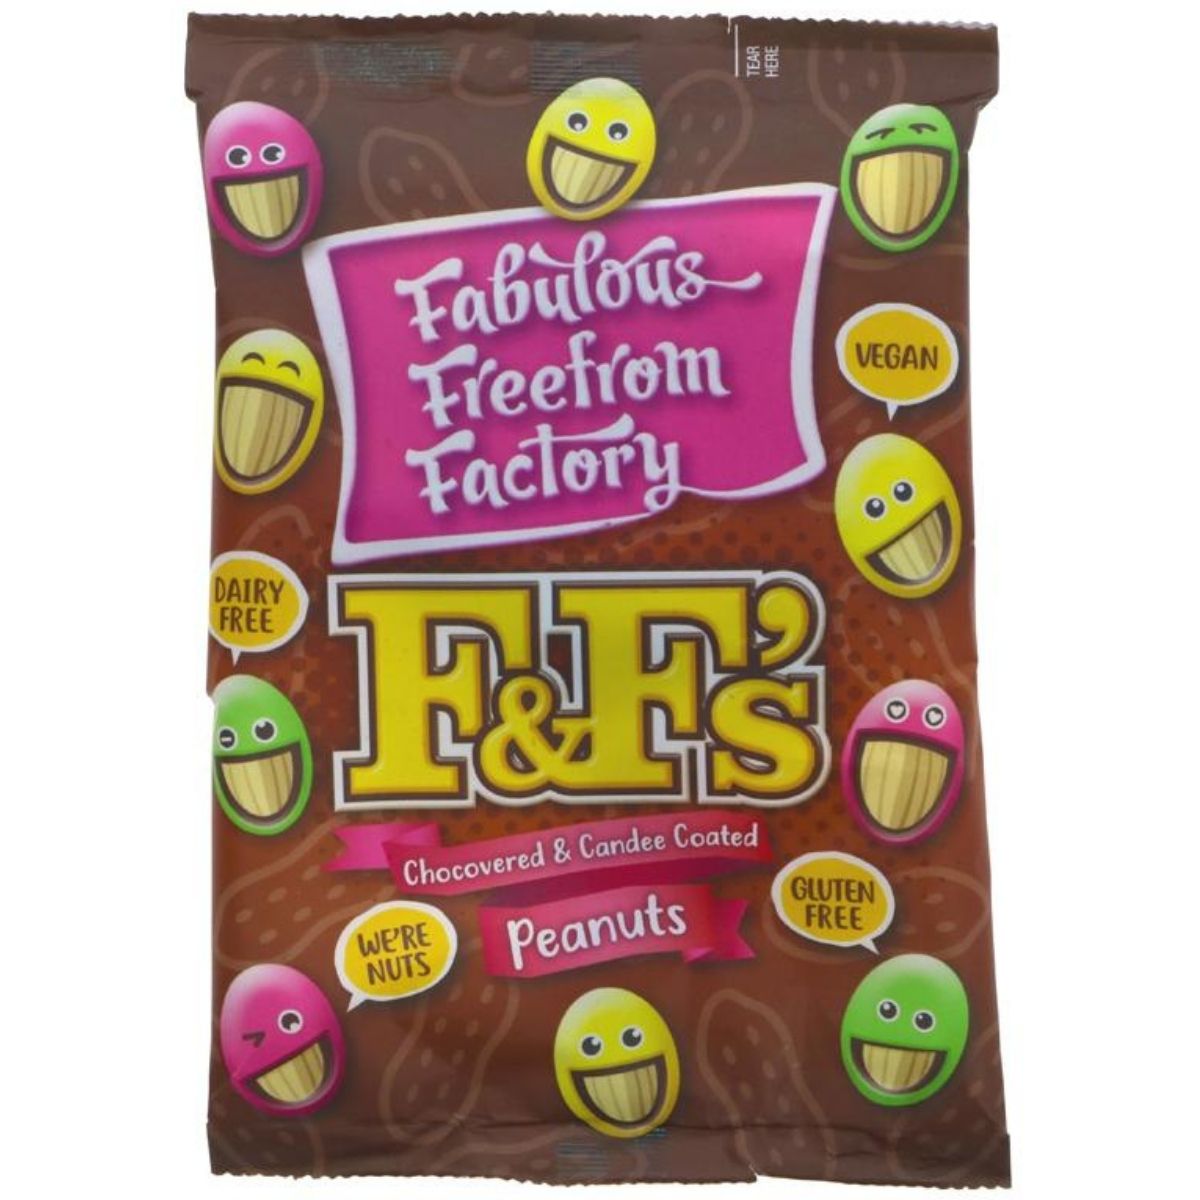 Fabulous Free From Factory F&F's - 55g